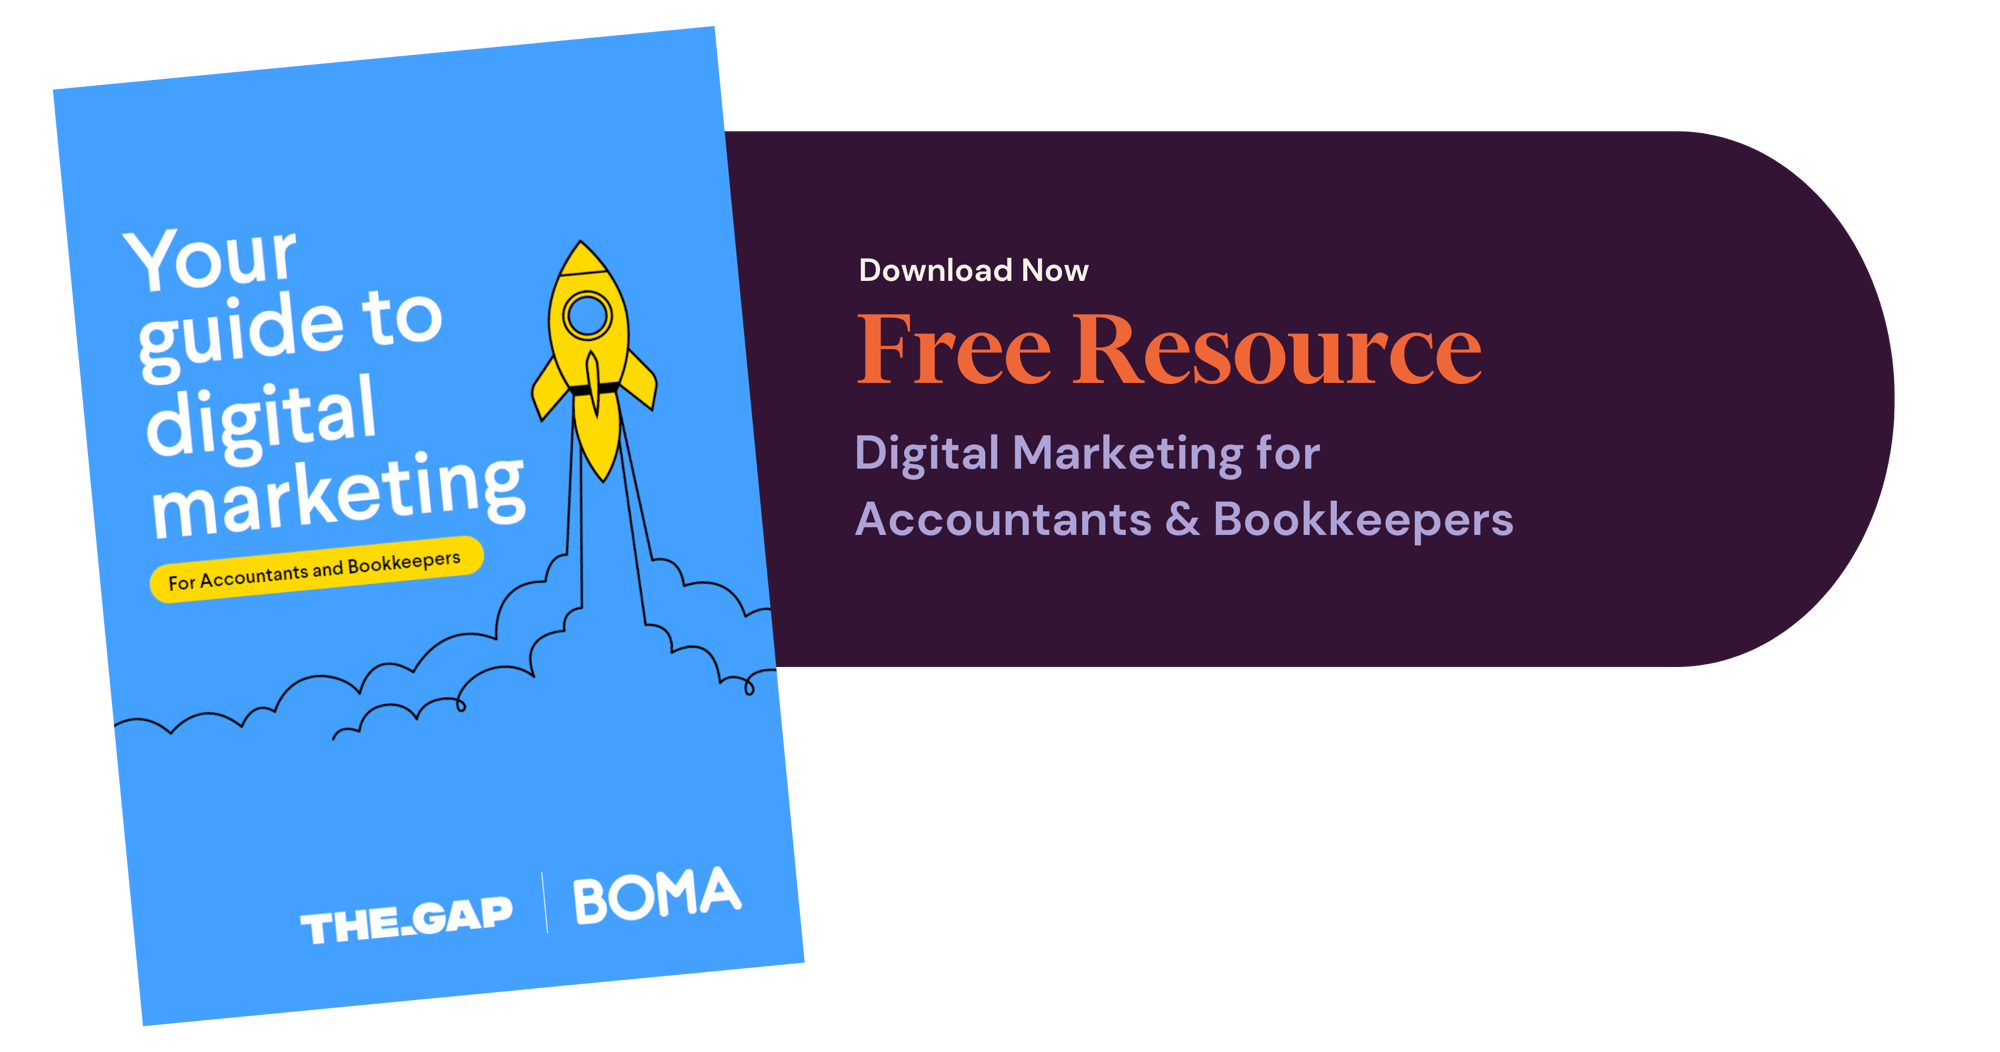 Download Banner - Digital Marketing for Accountants & Bookkeepers (3)